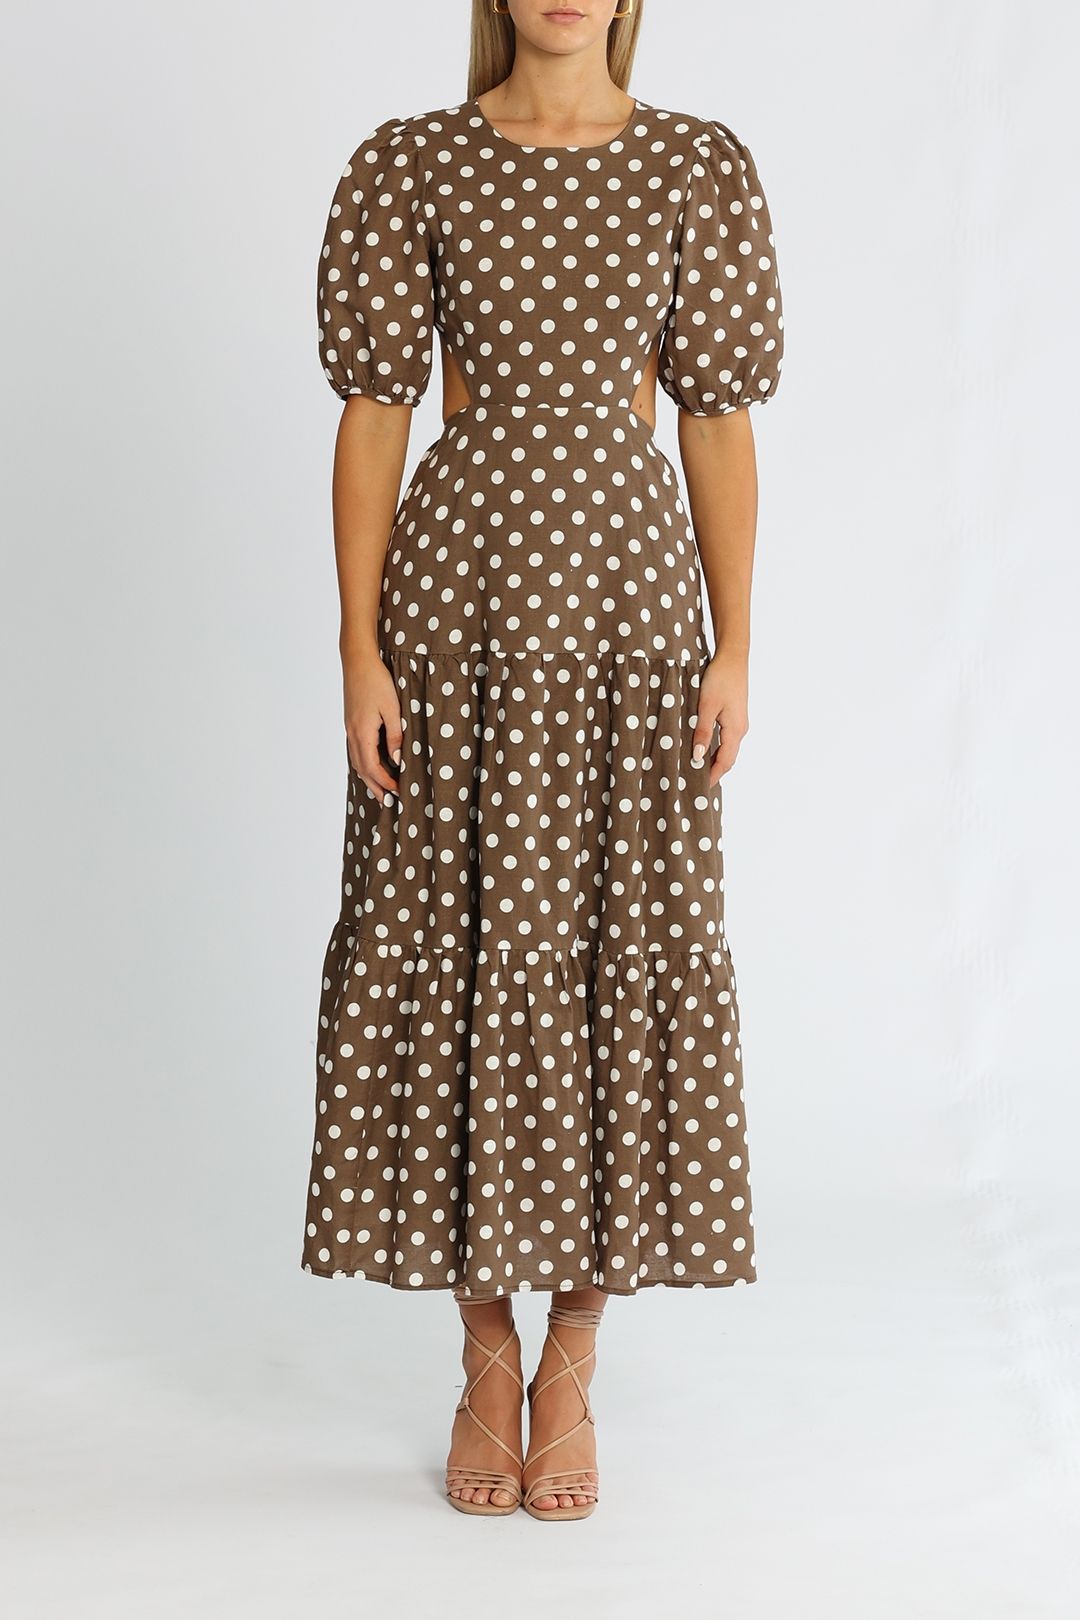 Charlie Holiday The Flores Midi Dress Brown Spot